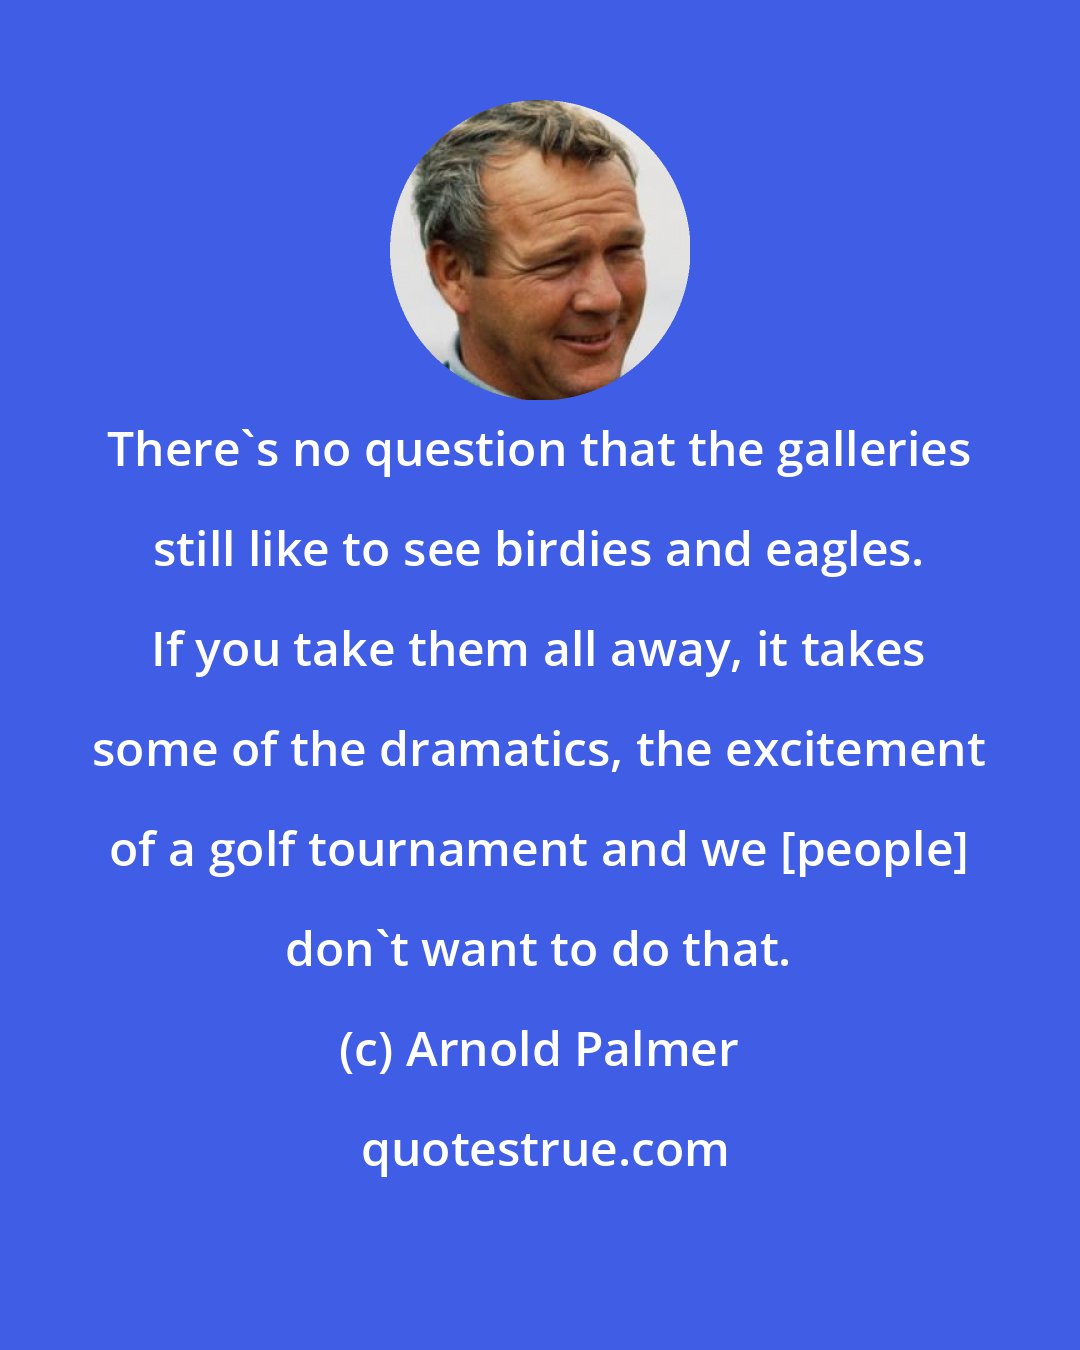 Arnold Palmer: There's no question that the galleries still like to see birdies and eagles. If you take them all away, it takes some of the dramatics, the excitement of a golf tournament and we [people] don't want to do that.